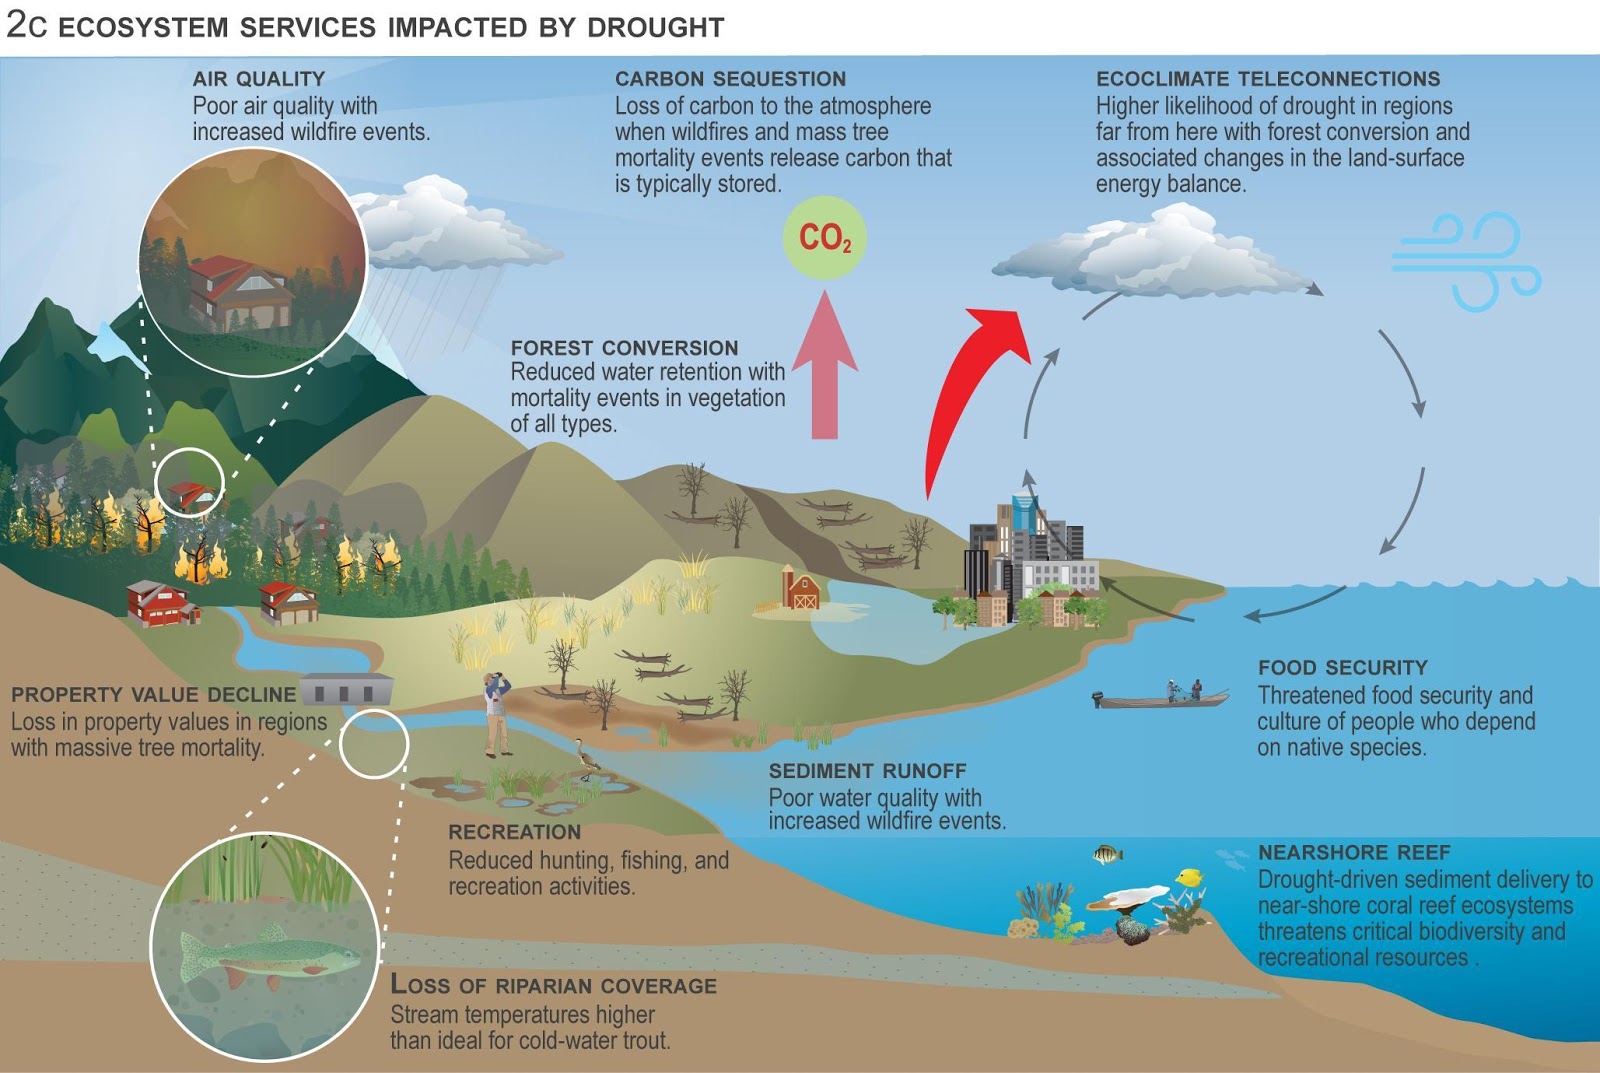 A depiction of ecosystem services lost after ecological drought impacts